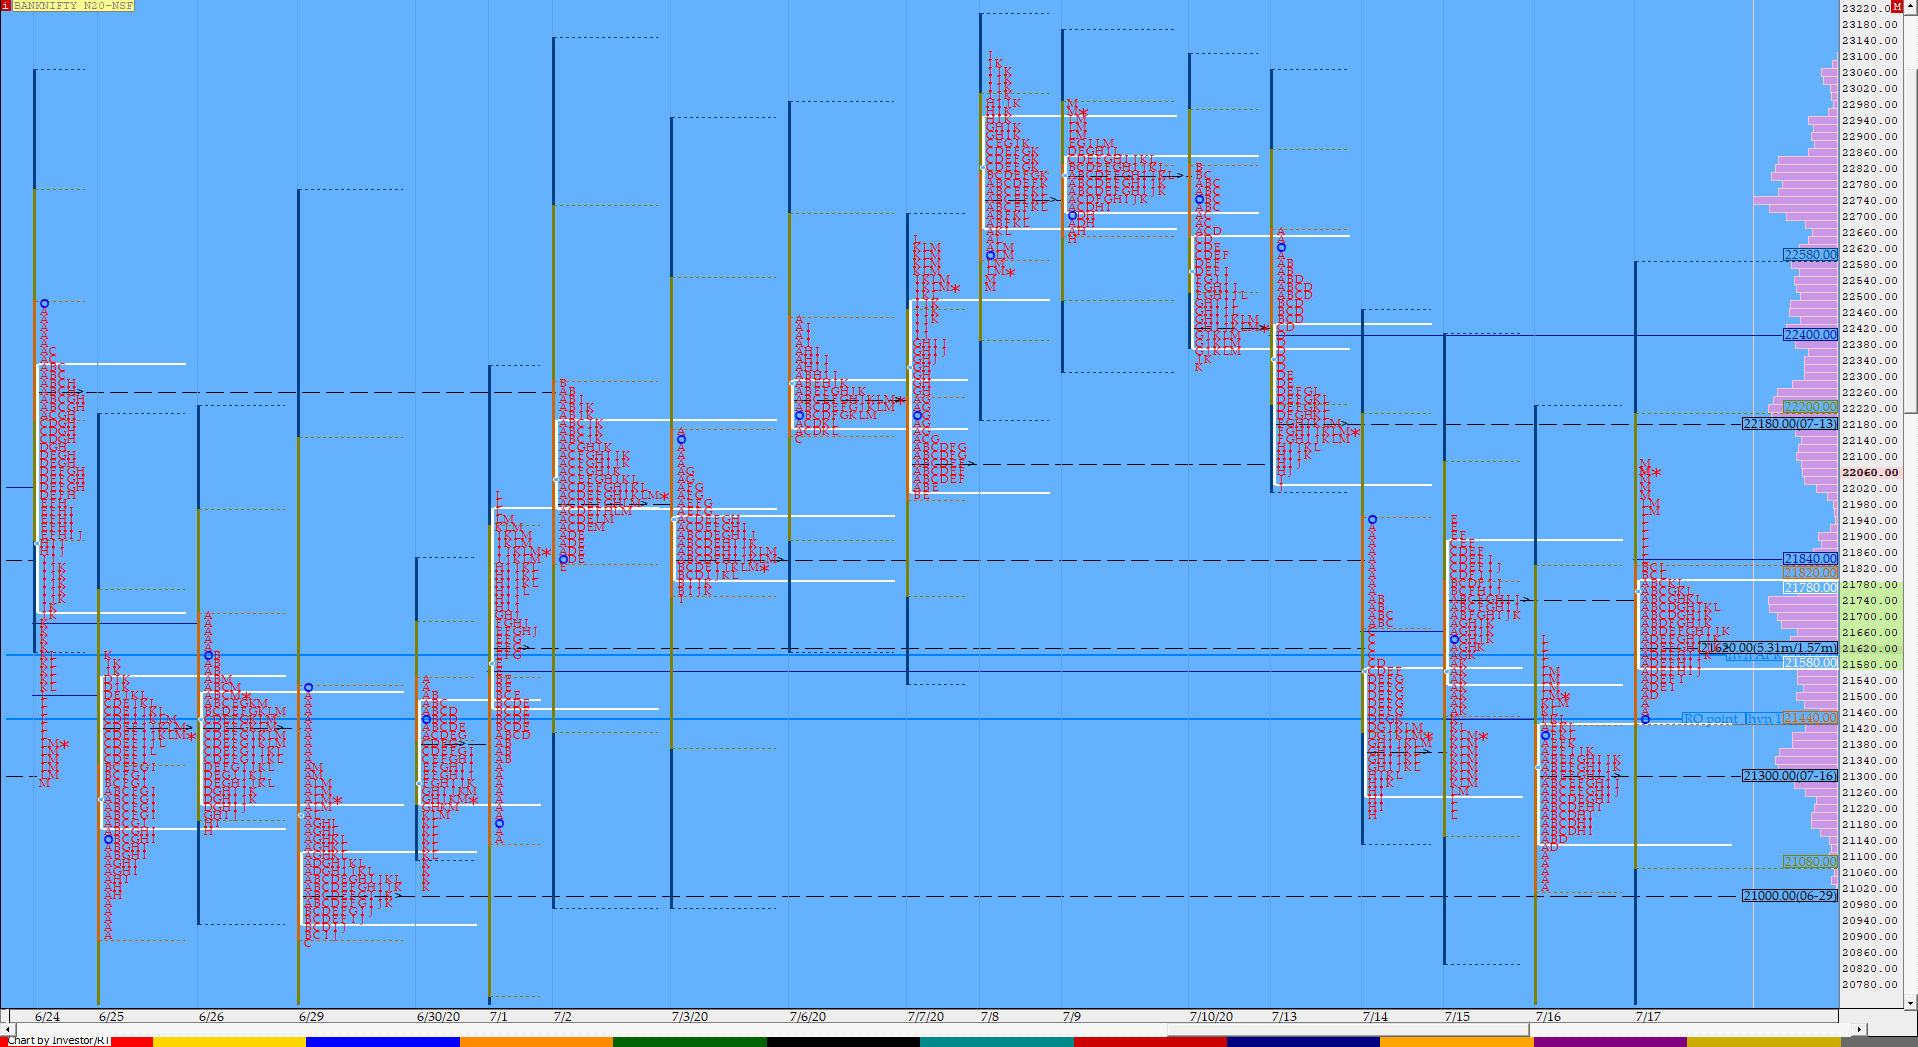 Bnf Compo1 13 Market Profile Analysis Dated 17Th July 2020 Banknifty Futures, Charts, Day Trading, Intraday Trading, Intraday Trading Strategies, Market Profile, Market Profile Trading Strategies, Nifty Futures, Order Flow Analysis, Support And Resistance, Technical Analysis, Trading Strategies, Volume Profile Trading